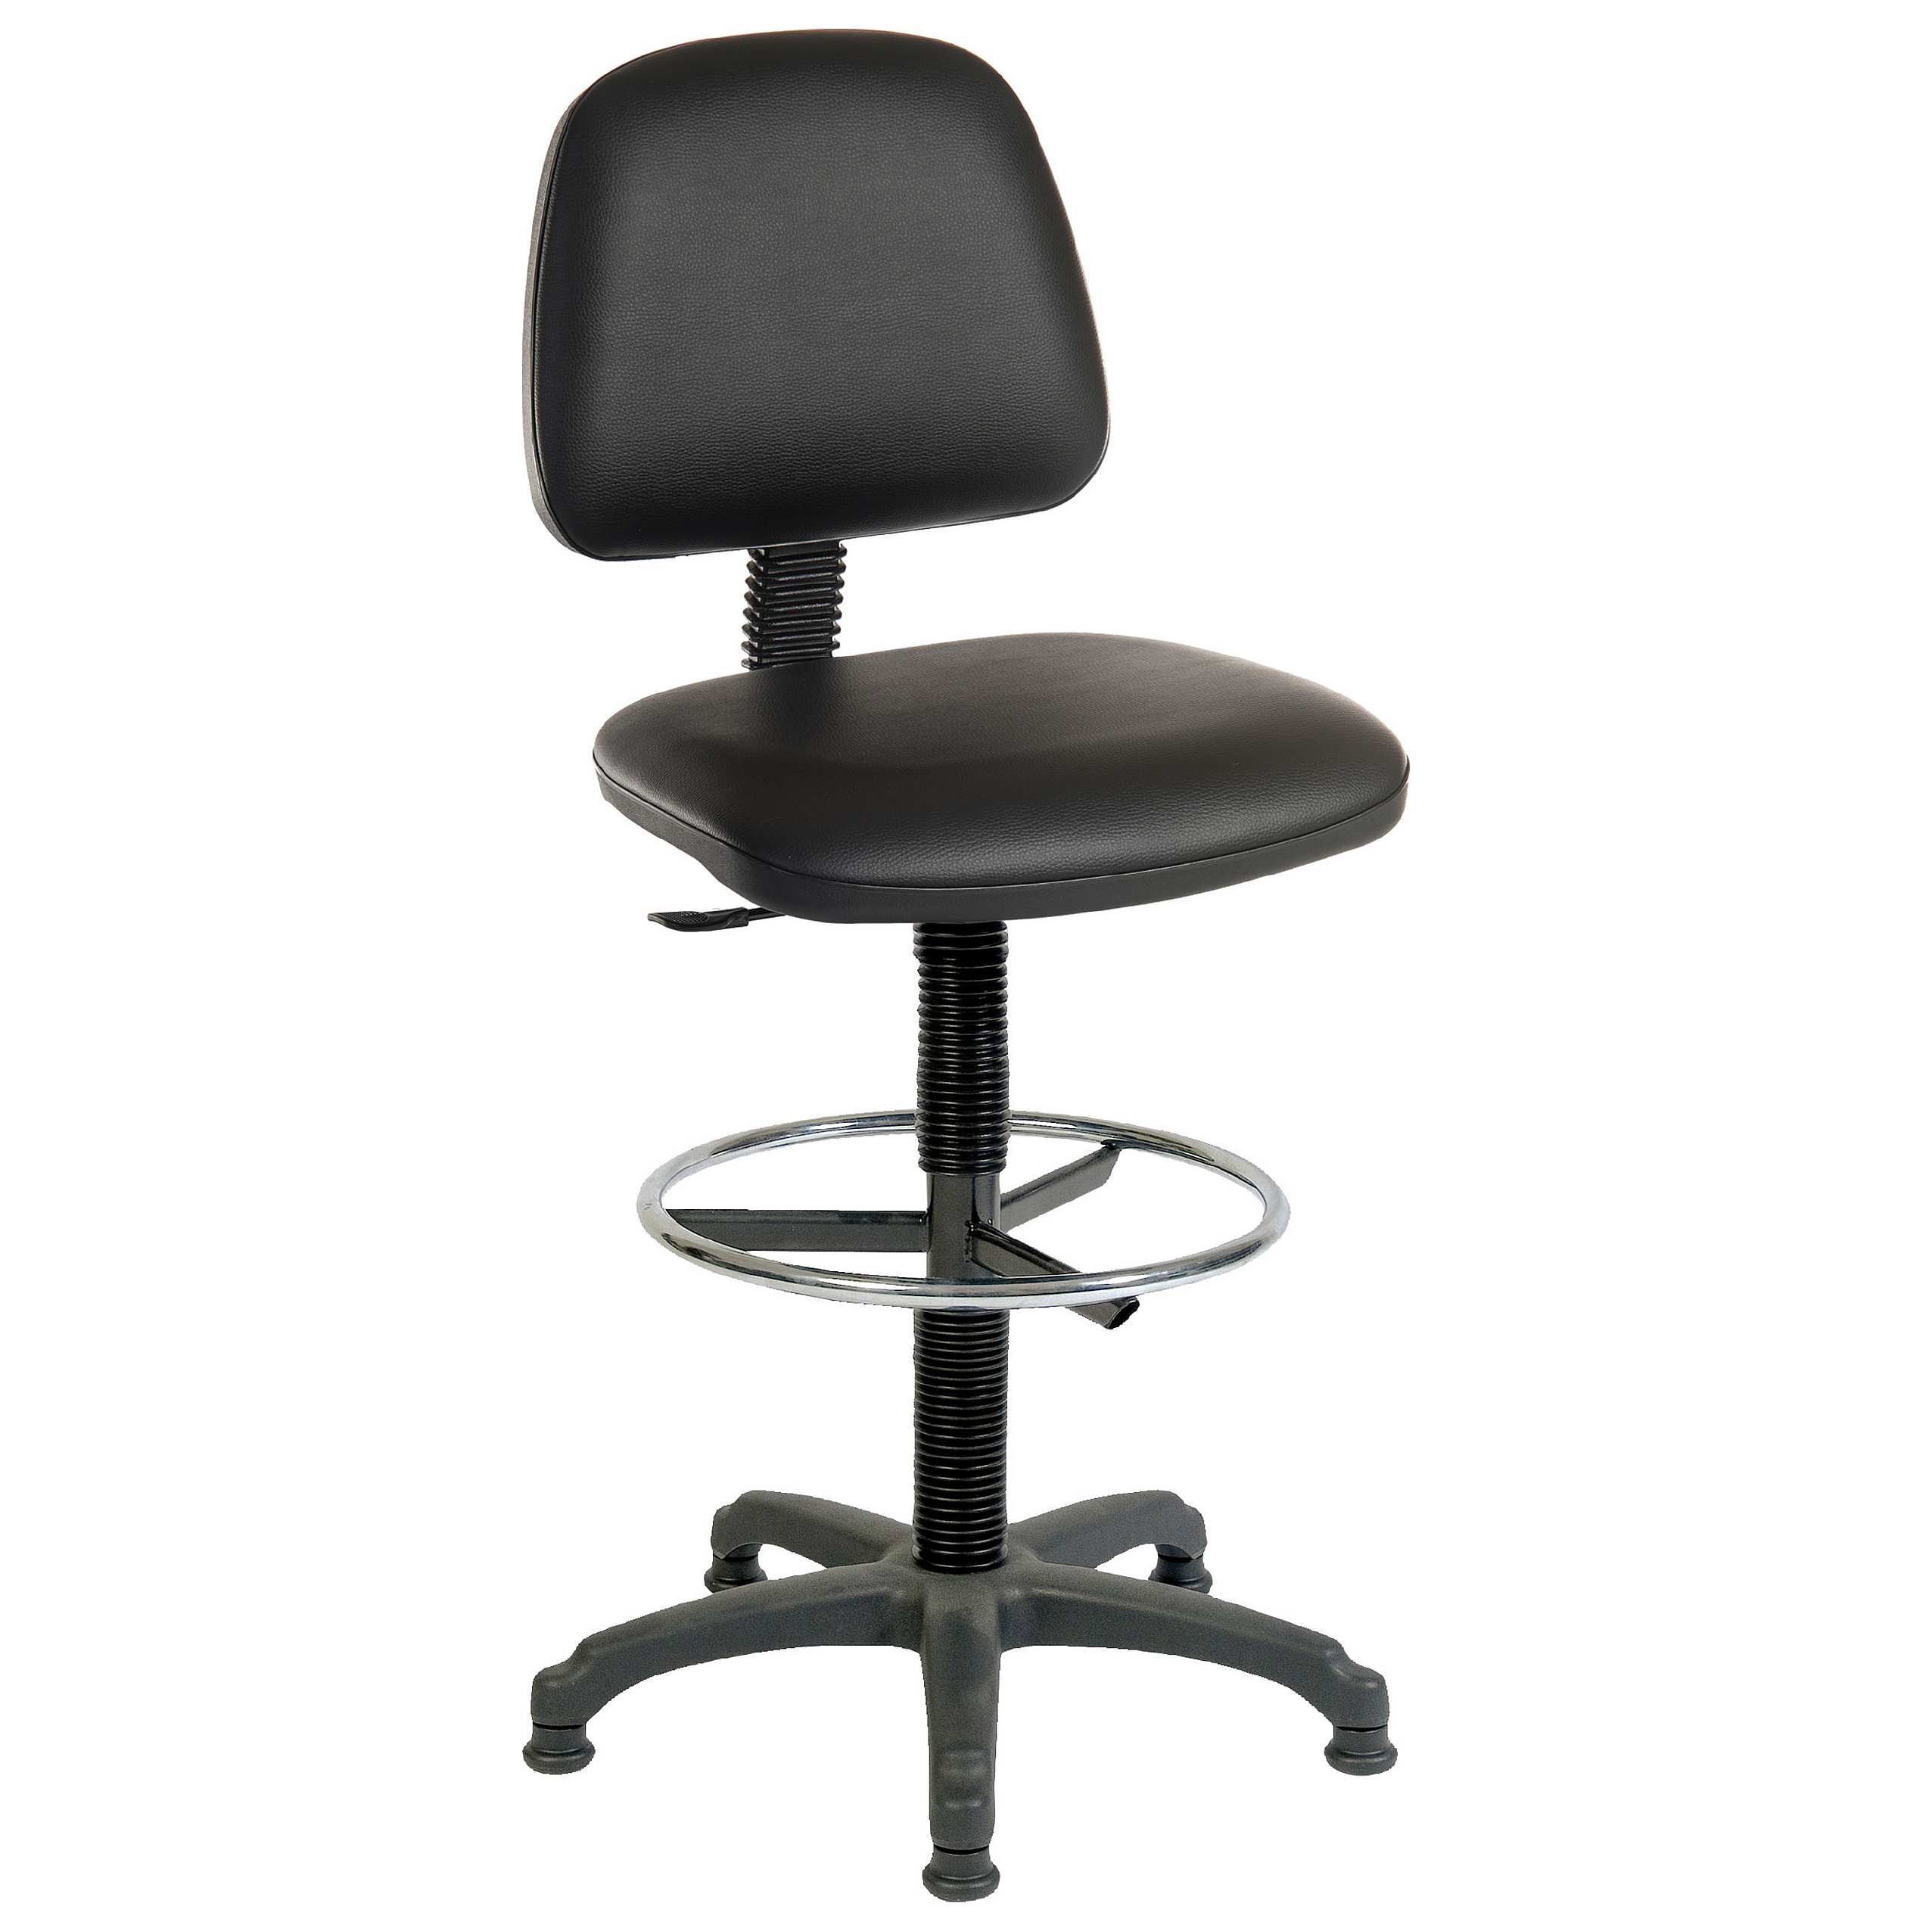 Draughtsman chair with casters